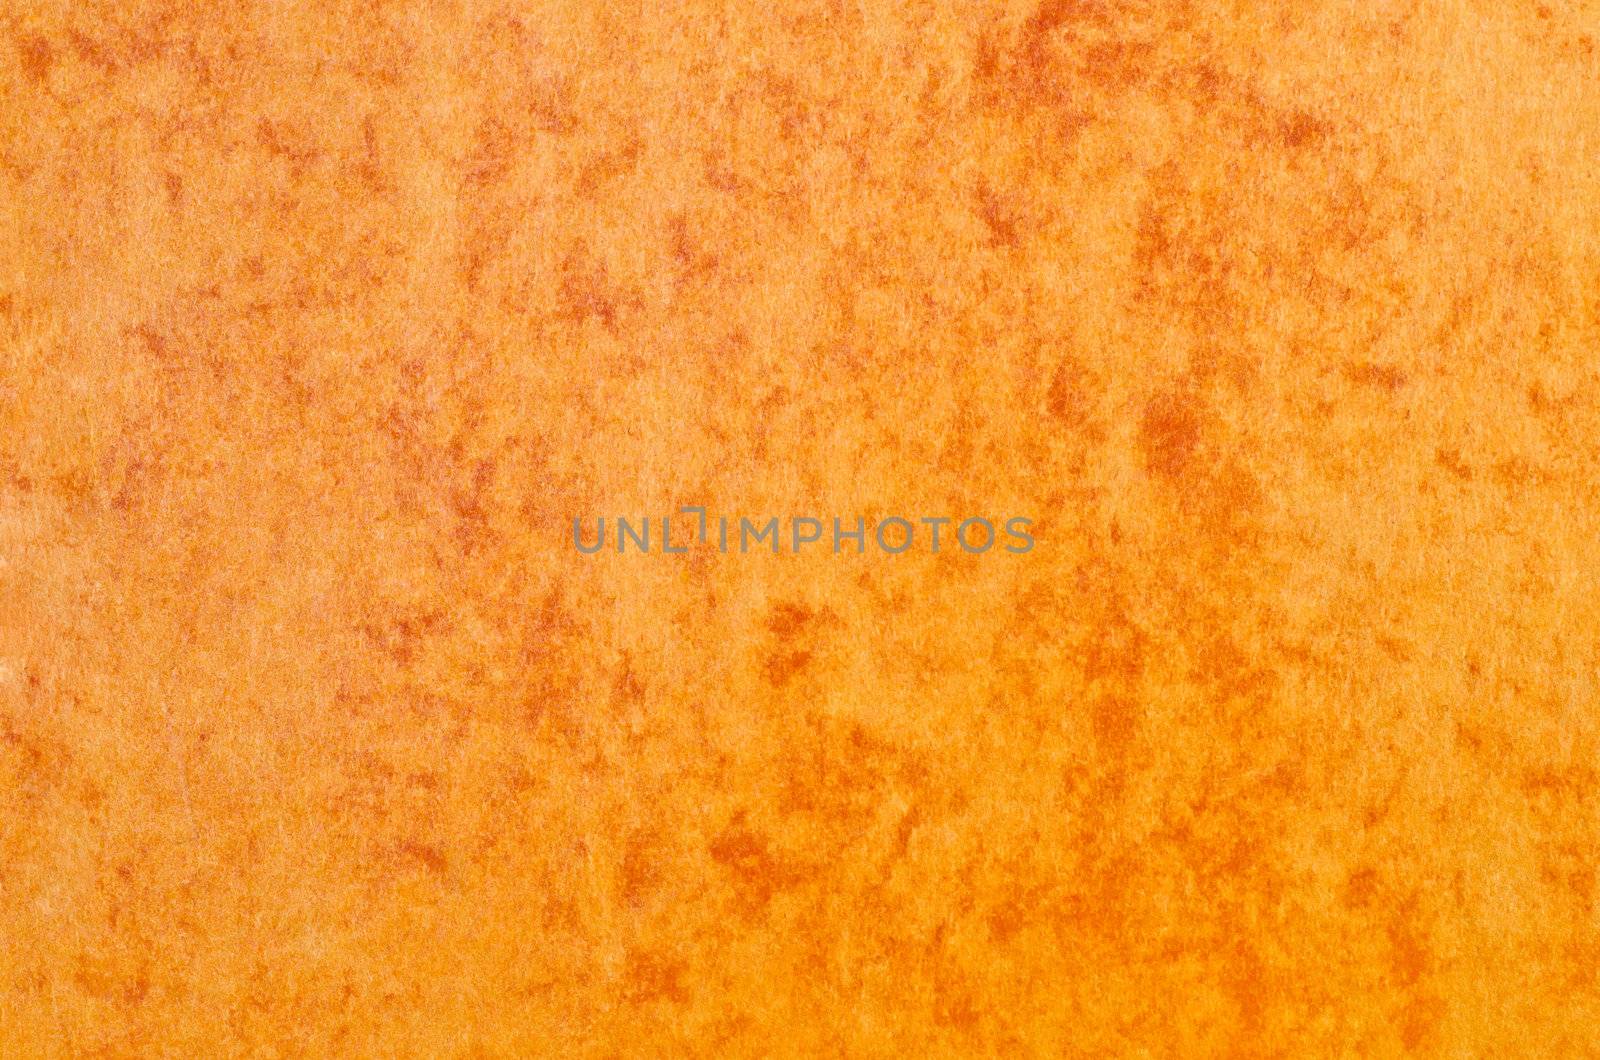 Orange paper texture background with red marble effect.